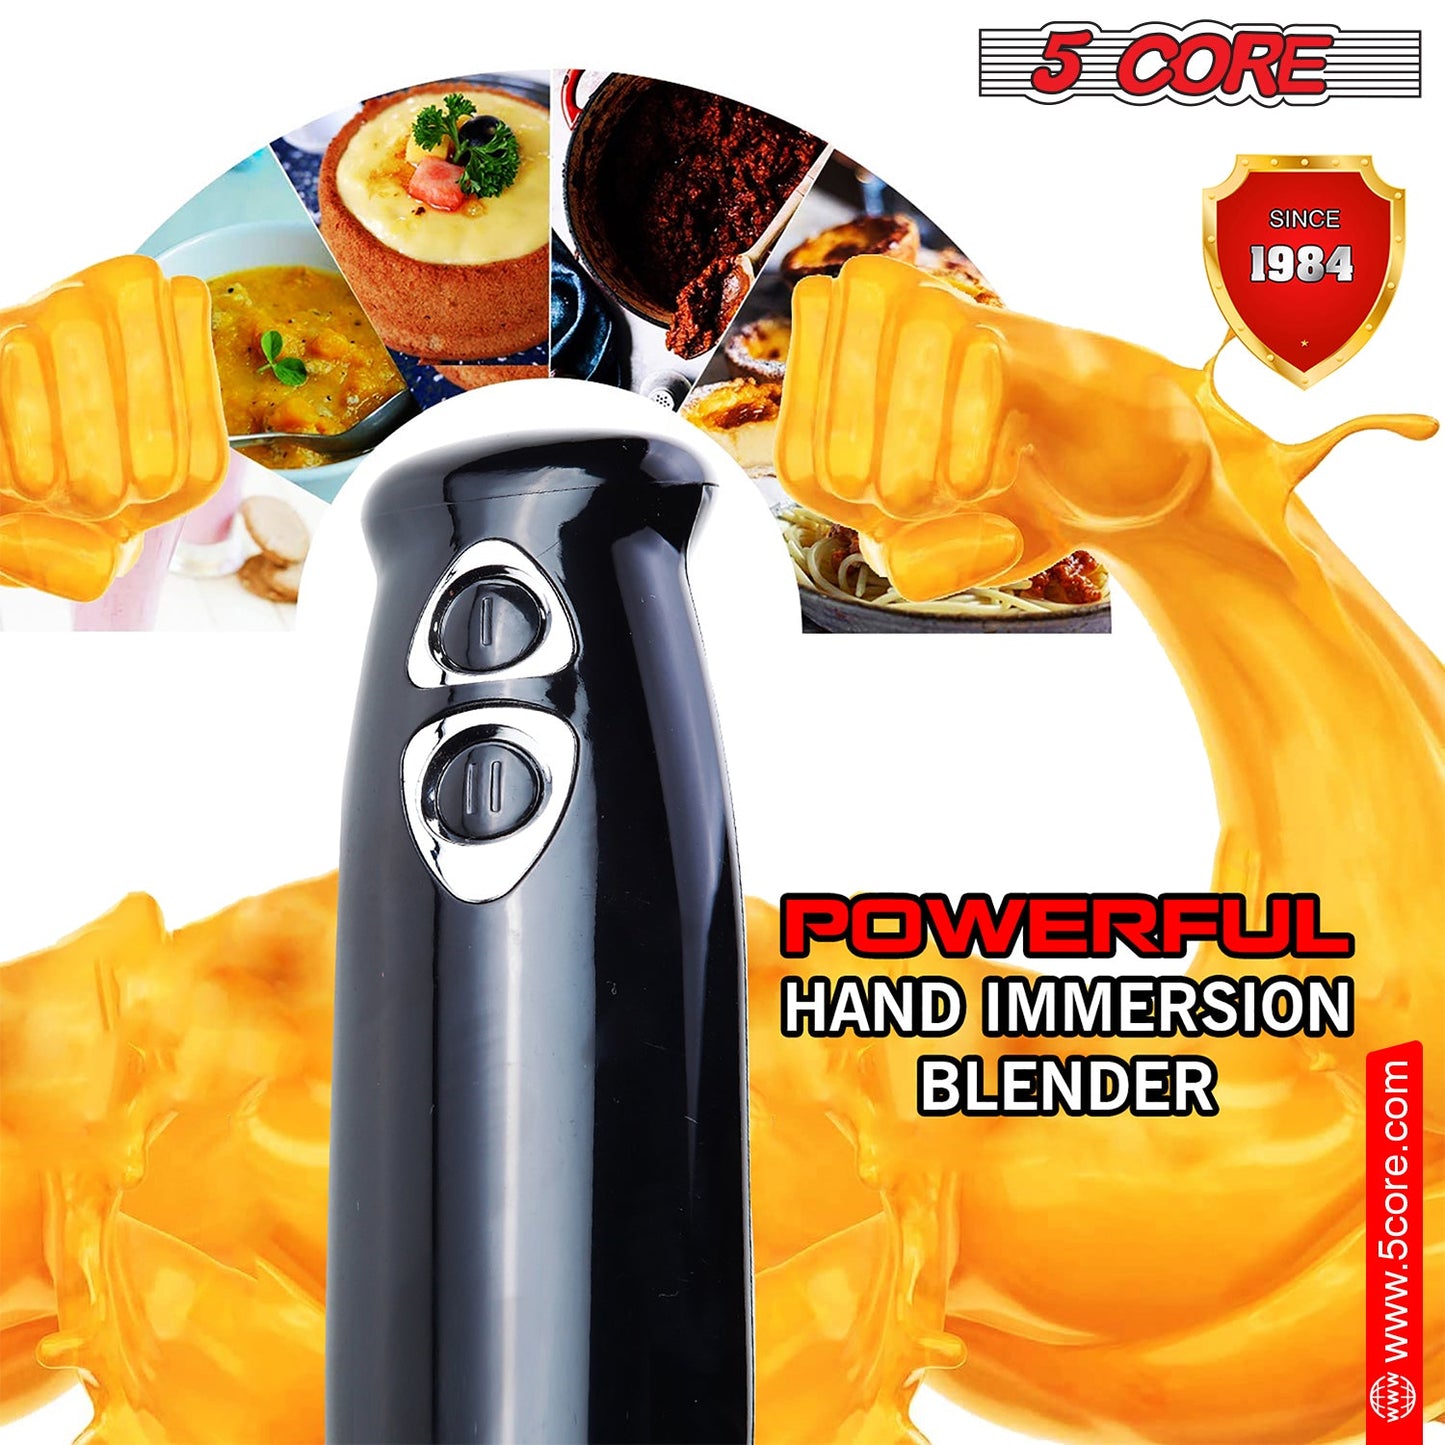 5Core Immersion Hand Blender 500W Electric Handheld Mixer w 2 Mixing Speed for Smoothies Puree-3